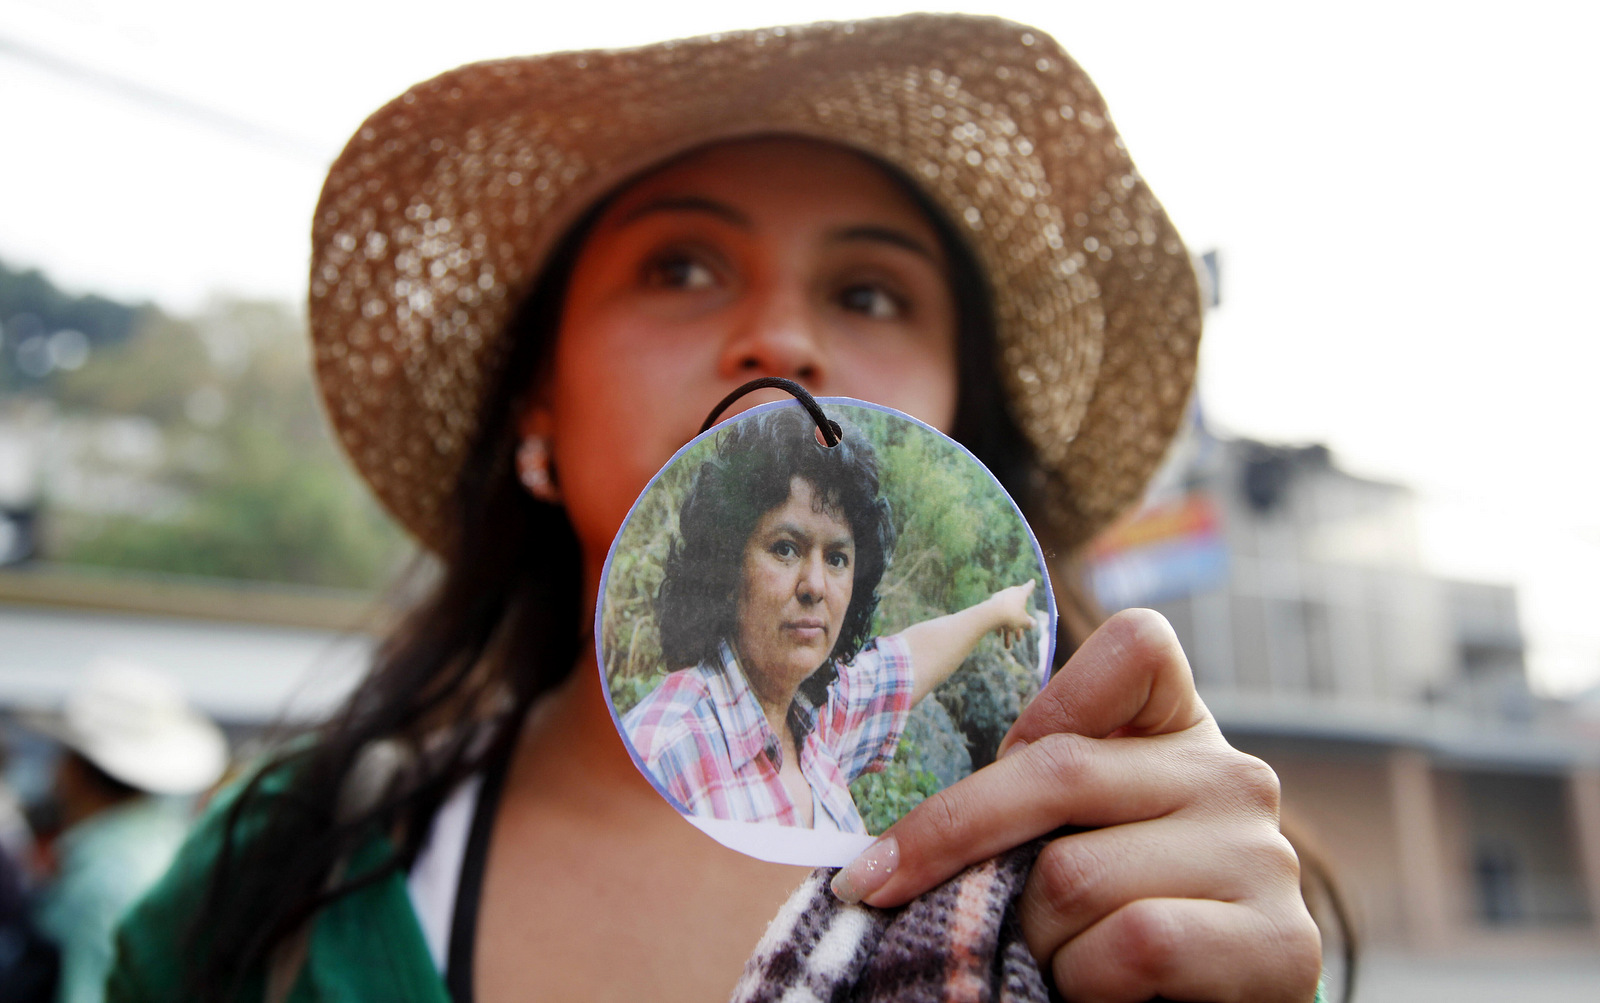 Suspects In Murder Of Environmental Activist Trained At Controversial U.S. Facility